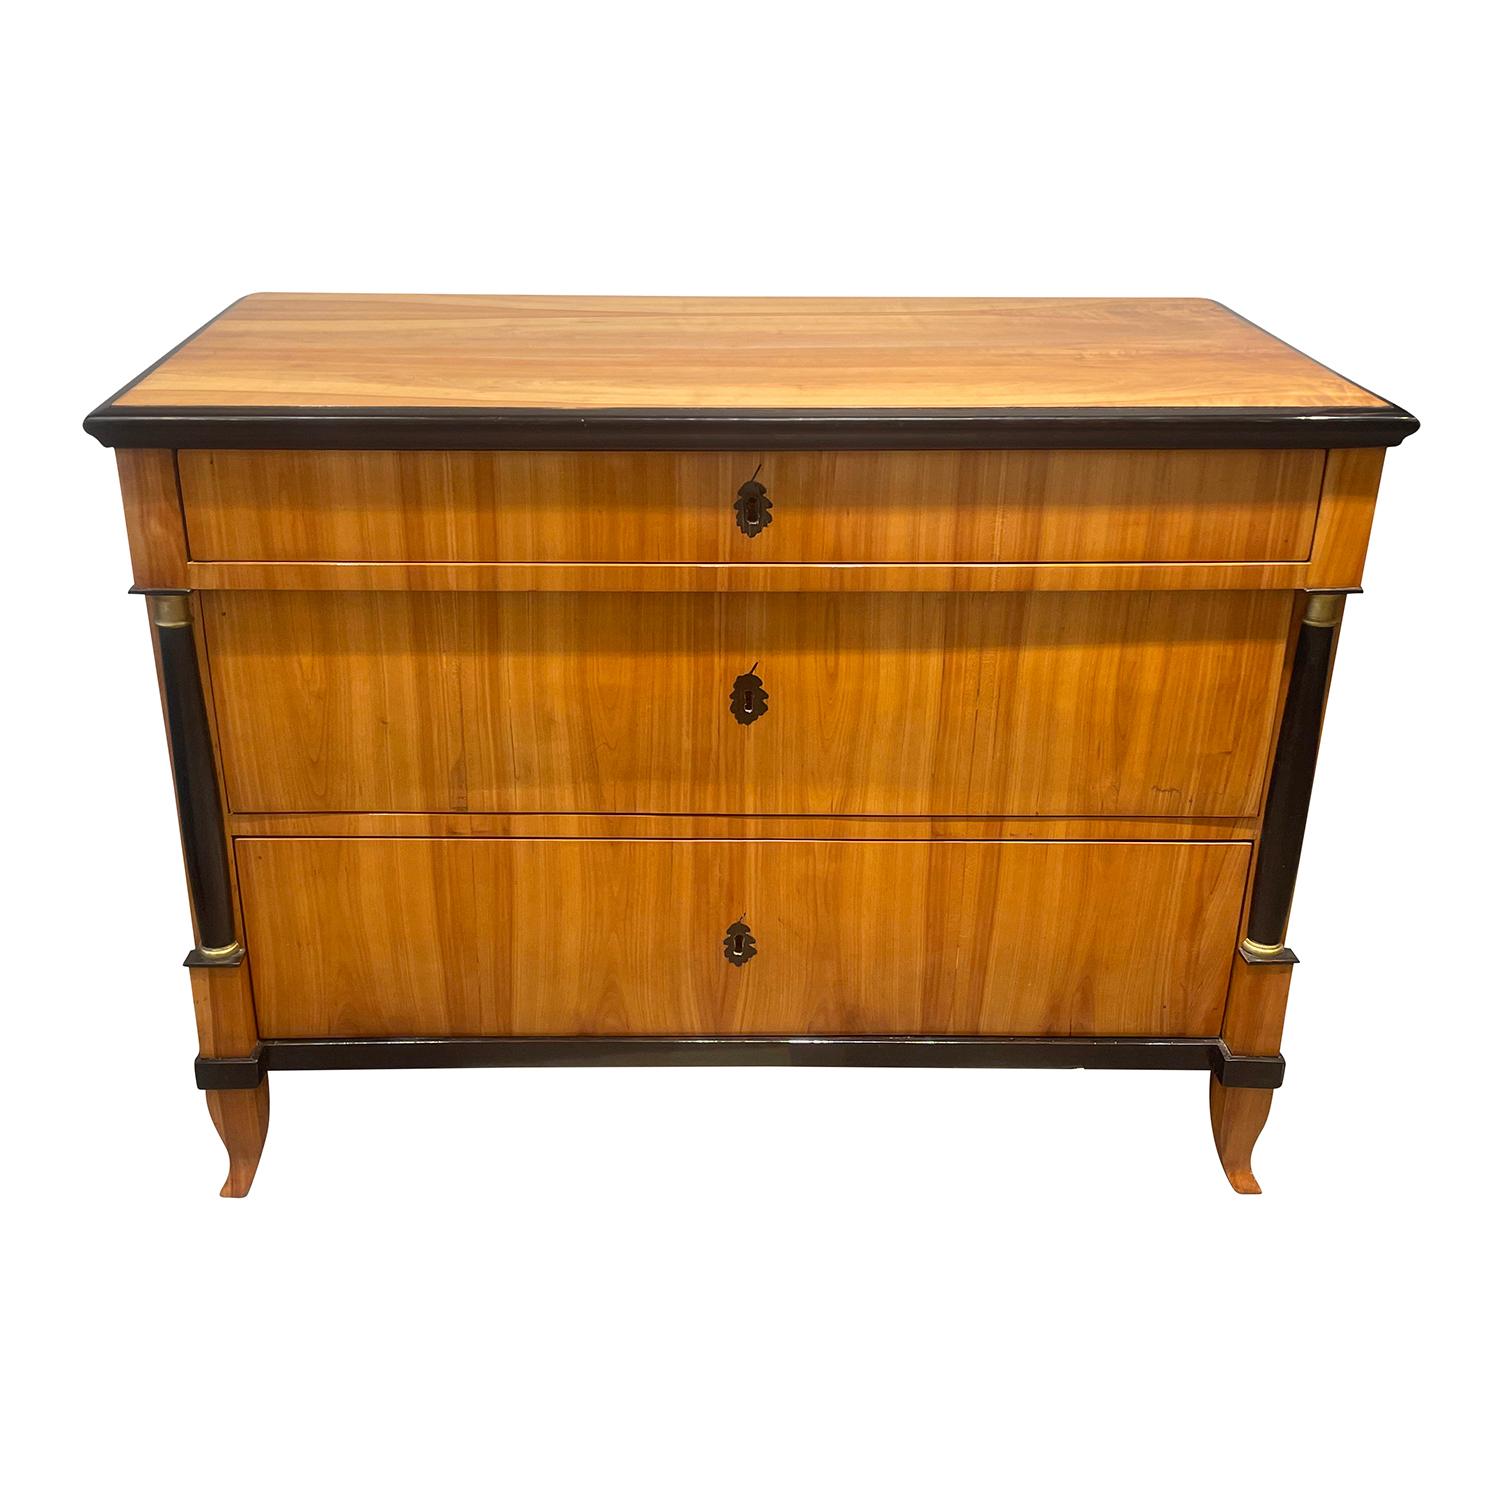 A light-brown, antique German Biedermeier single chest made of handcrafted shellac polished veneered Cherrywood, in very good condition. The detailed cabinet is composed with three drawers, consisting its original hardware and keys, particularized